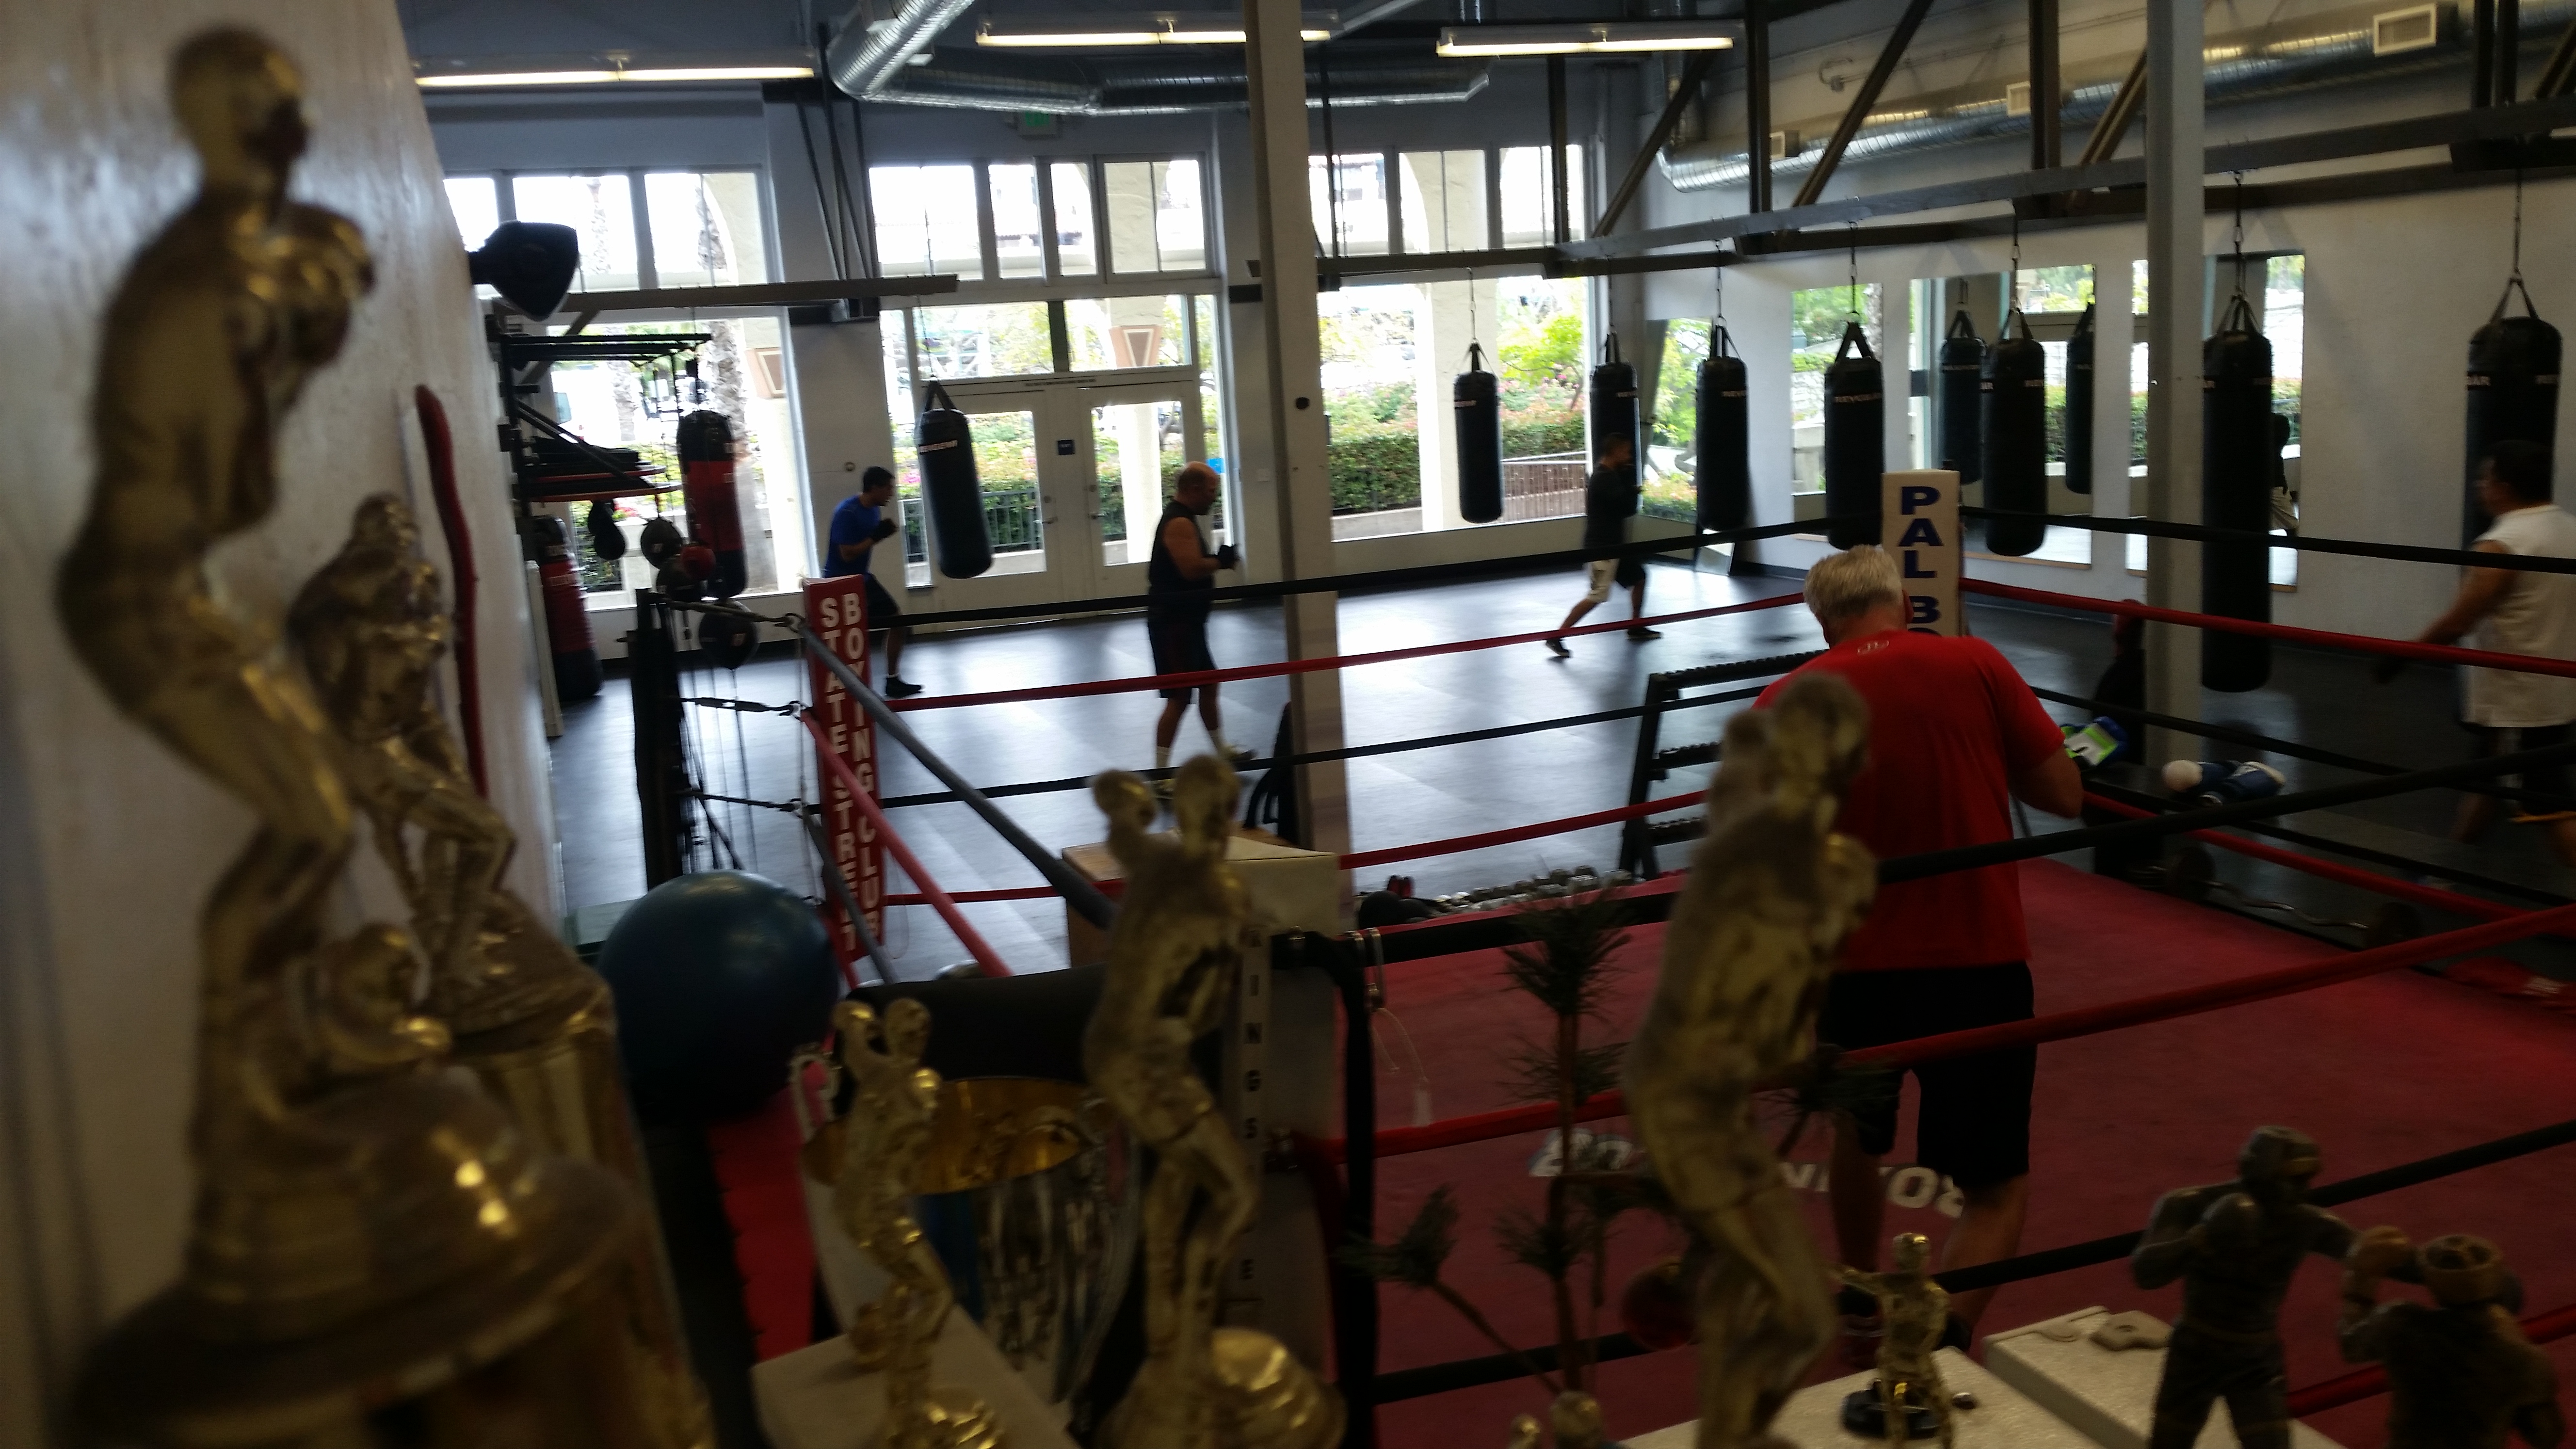 There is no more comprehensive workout than that of the boxer. Learn from the best instructor in town at State Street Boxing Club. -Cody Sabo